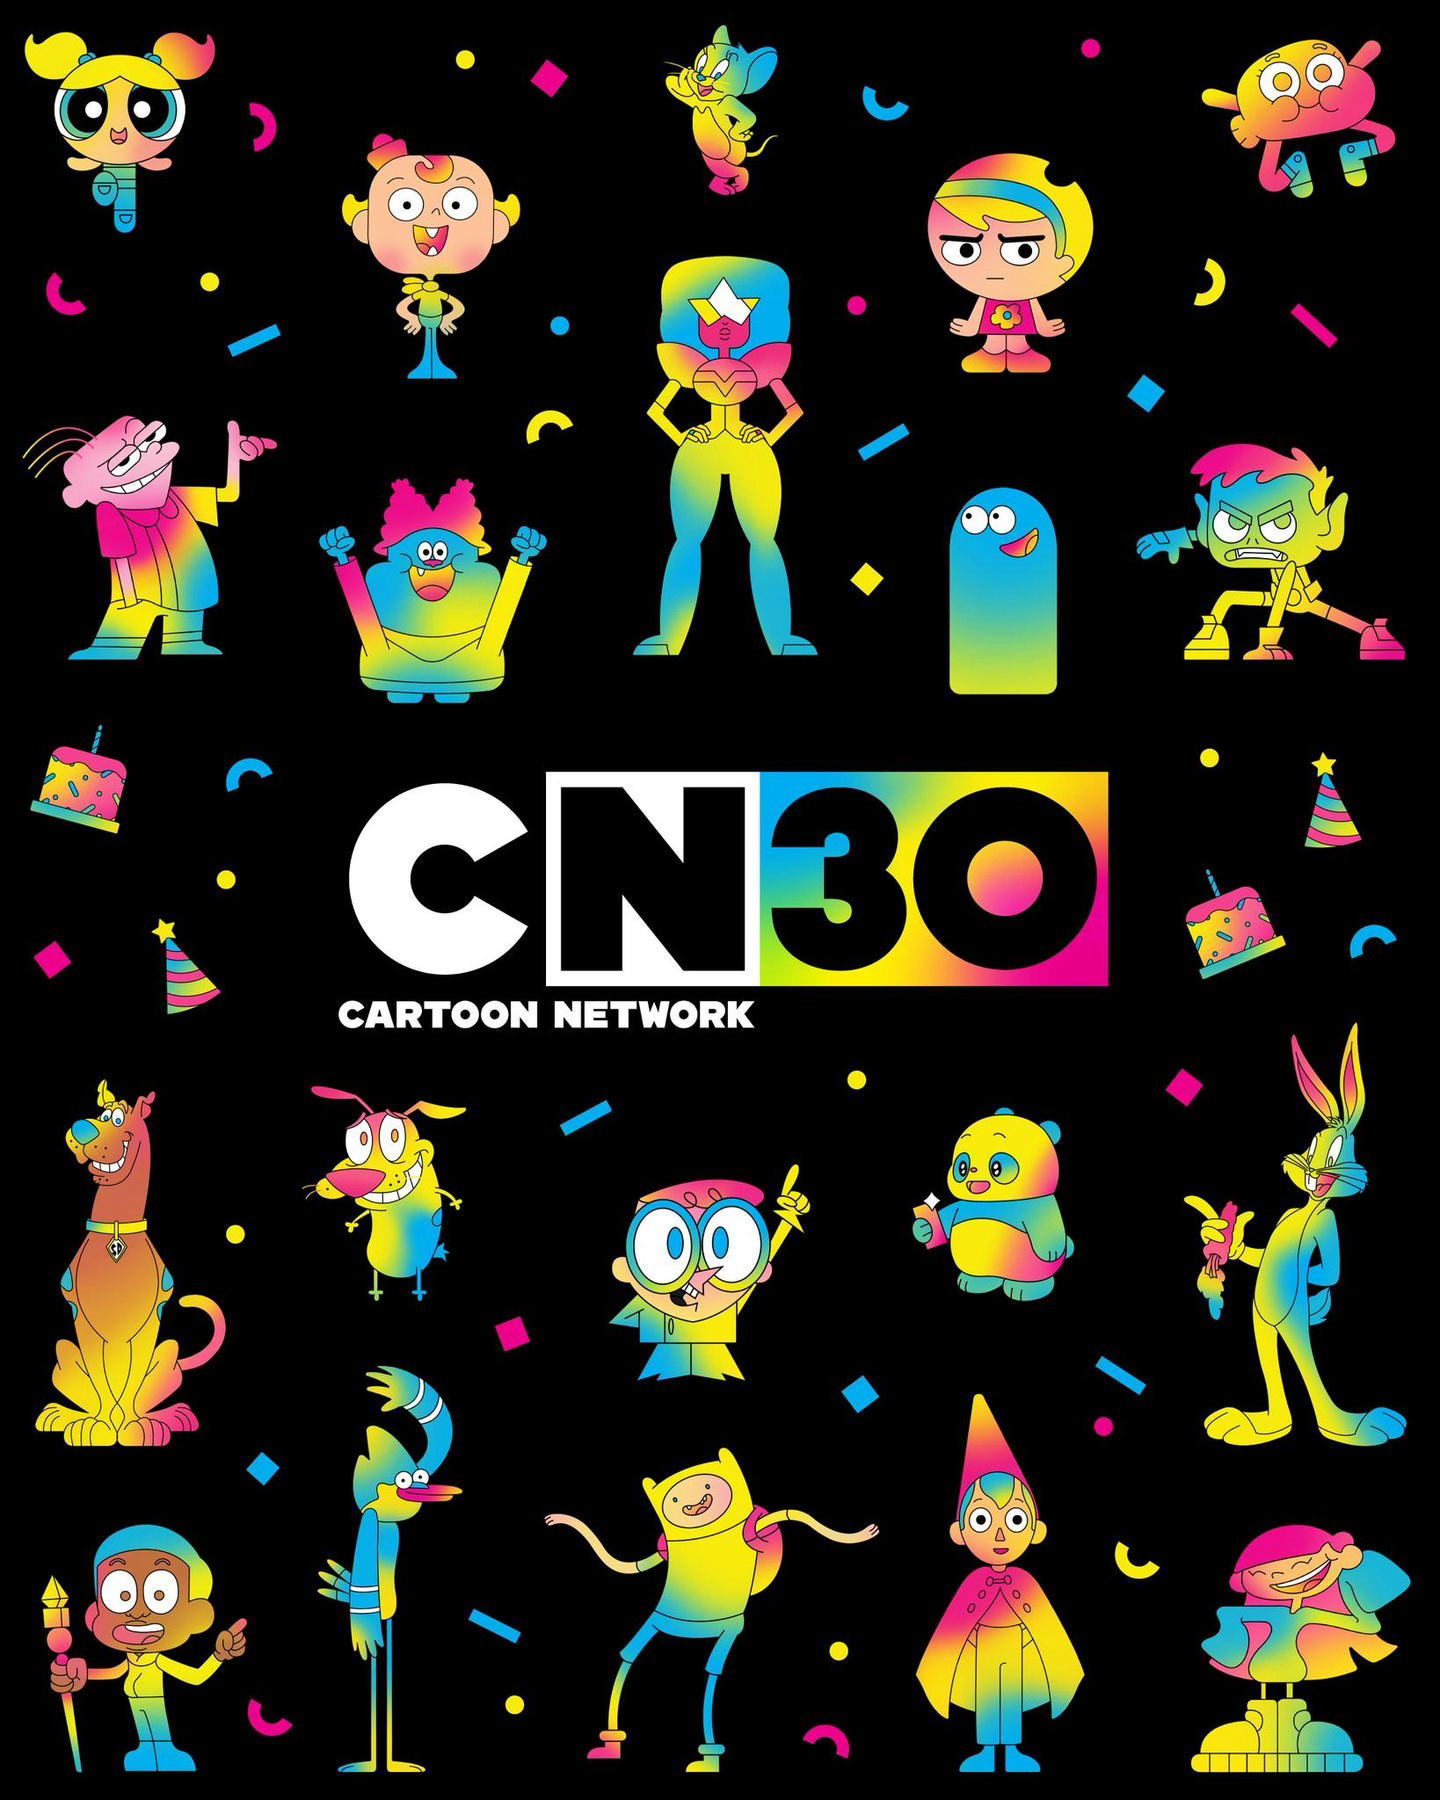 Cartoon Network - Here's to 3️⃣0️⃣ years of iconic shows, unforgettable characters, and the best fan